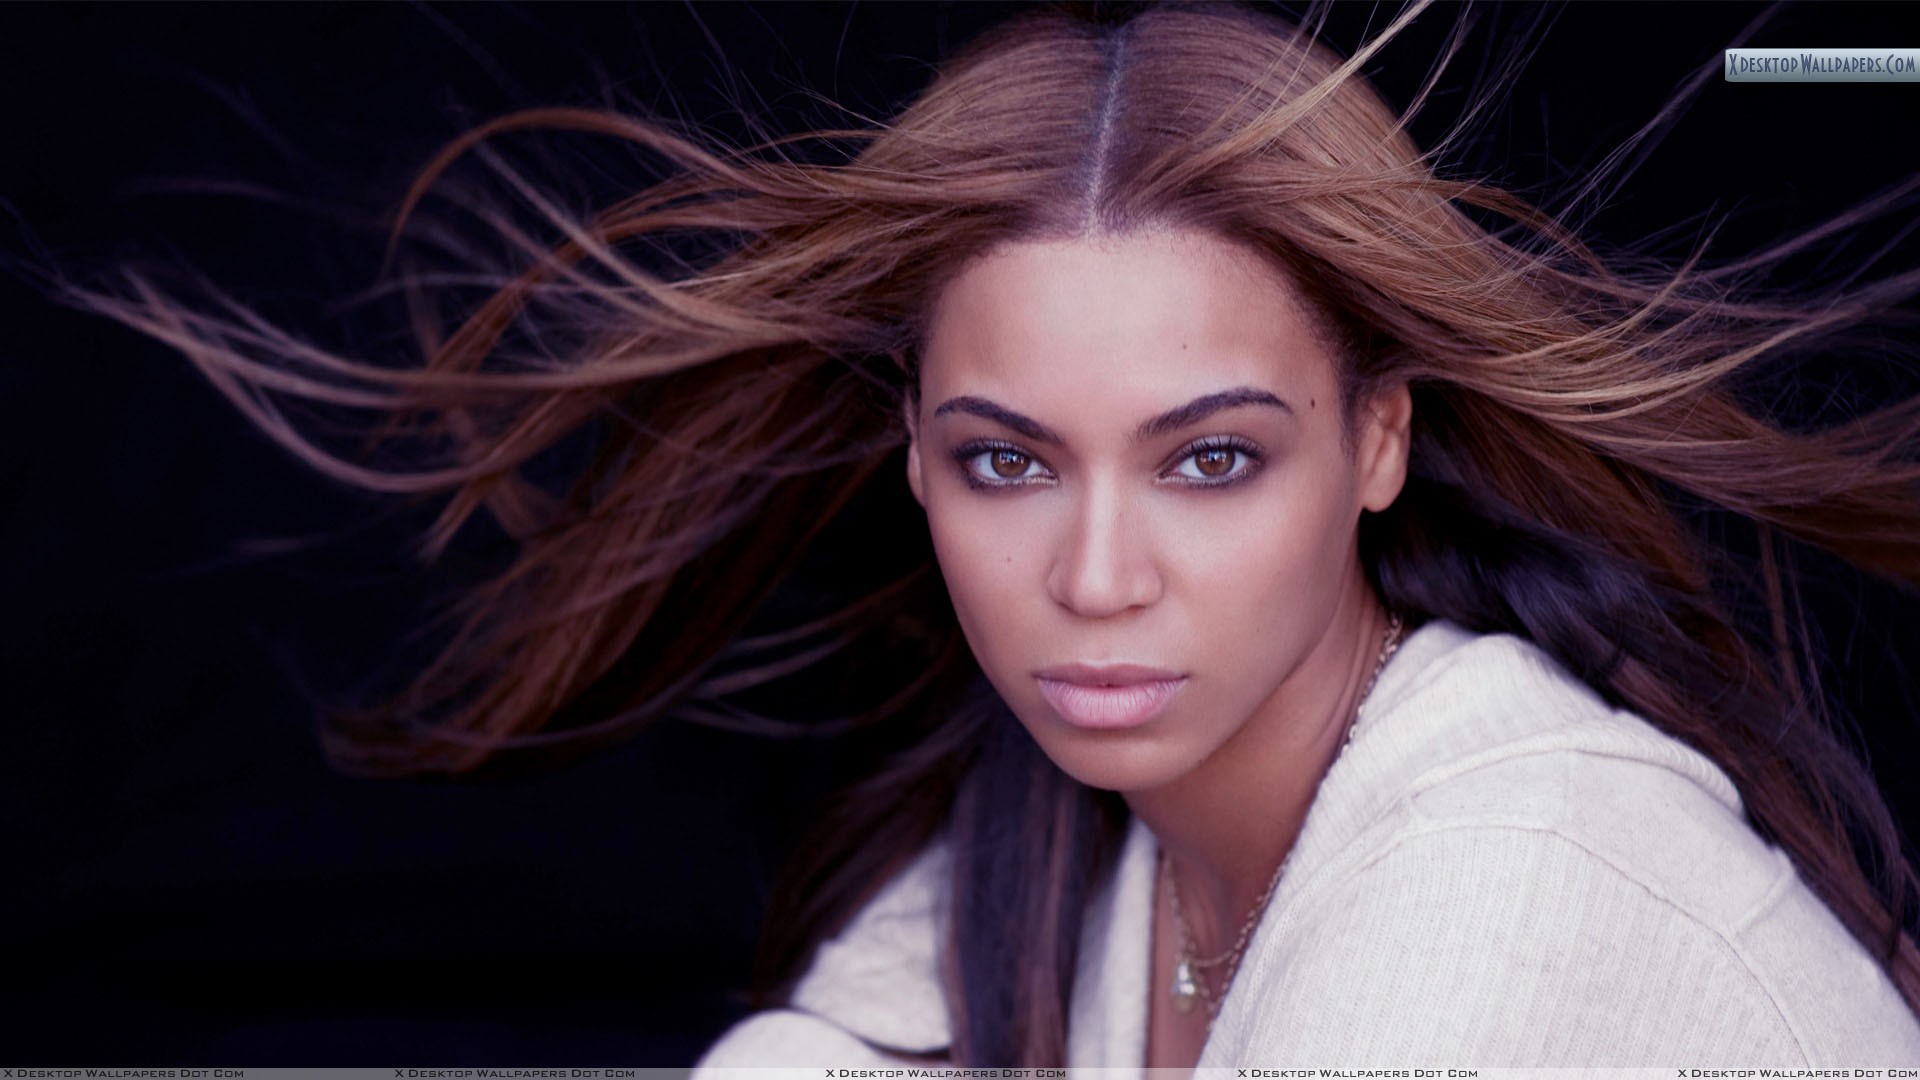 Beyonce Knowles Wallpaper Photos Image In HD